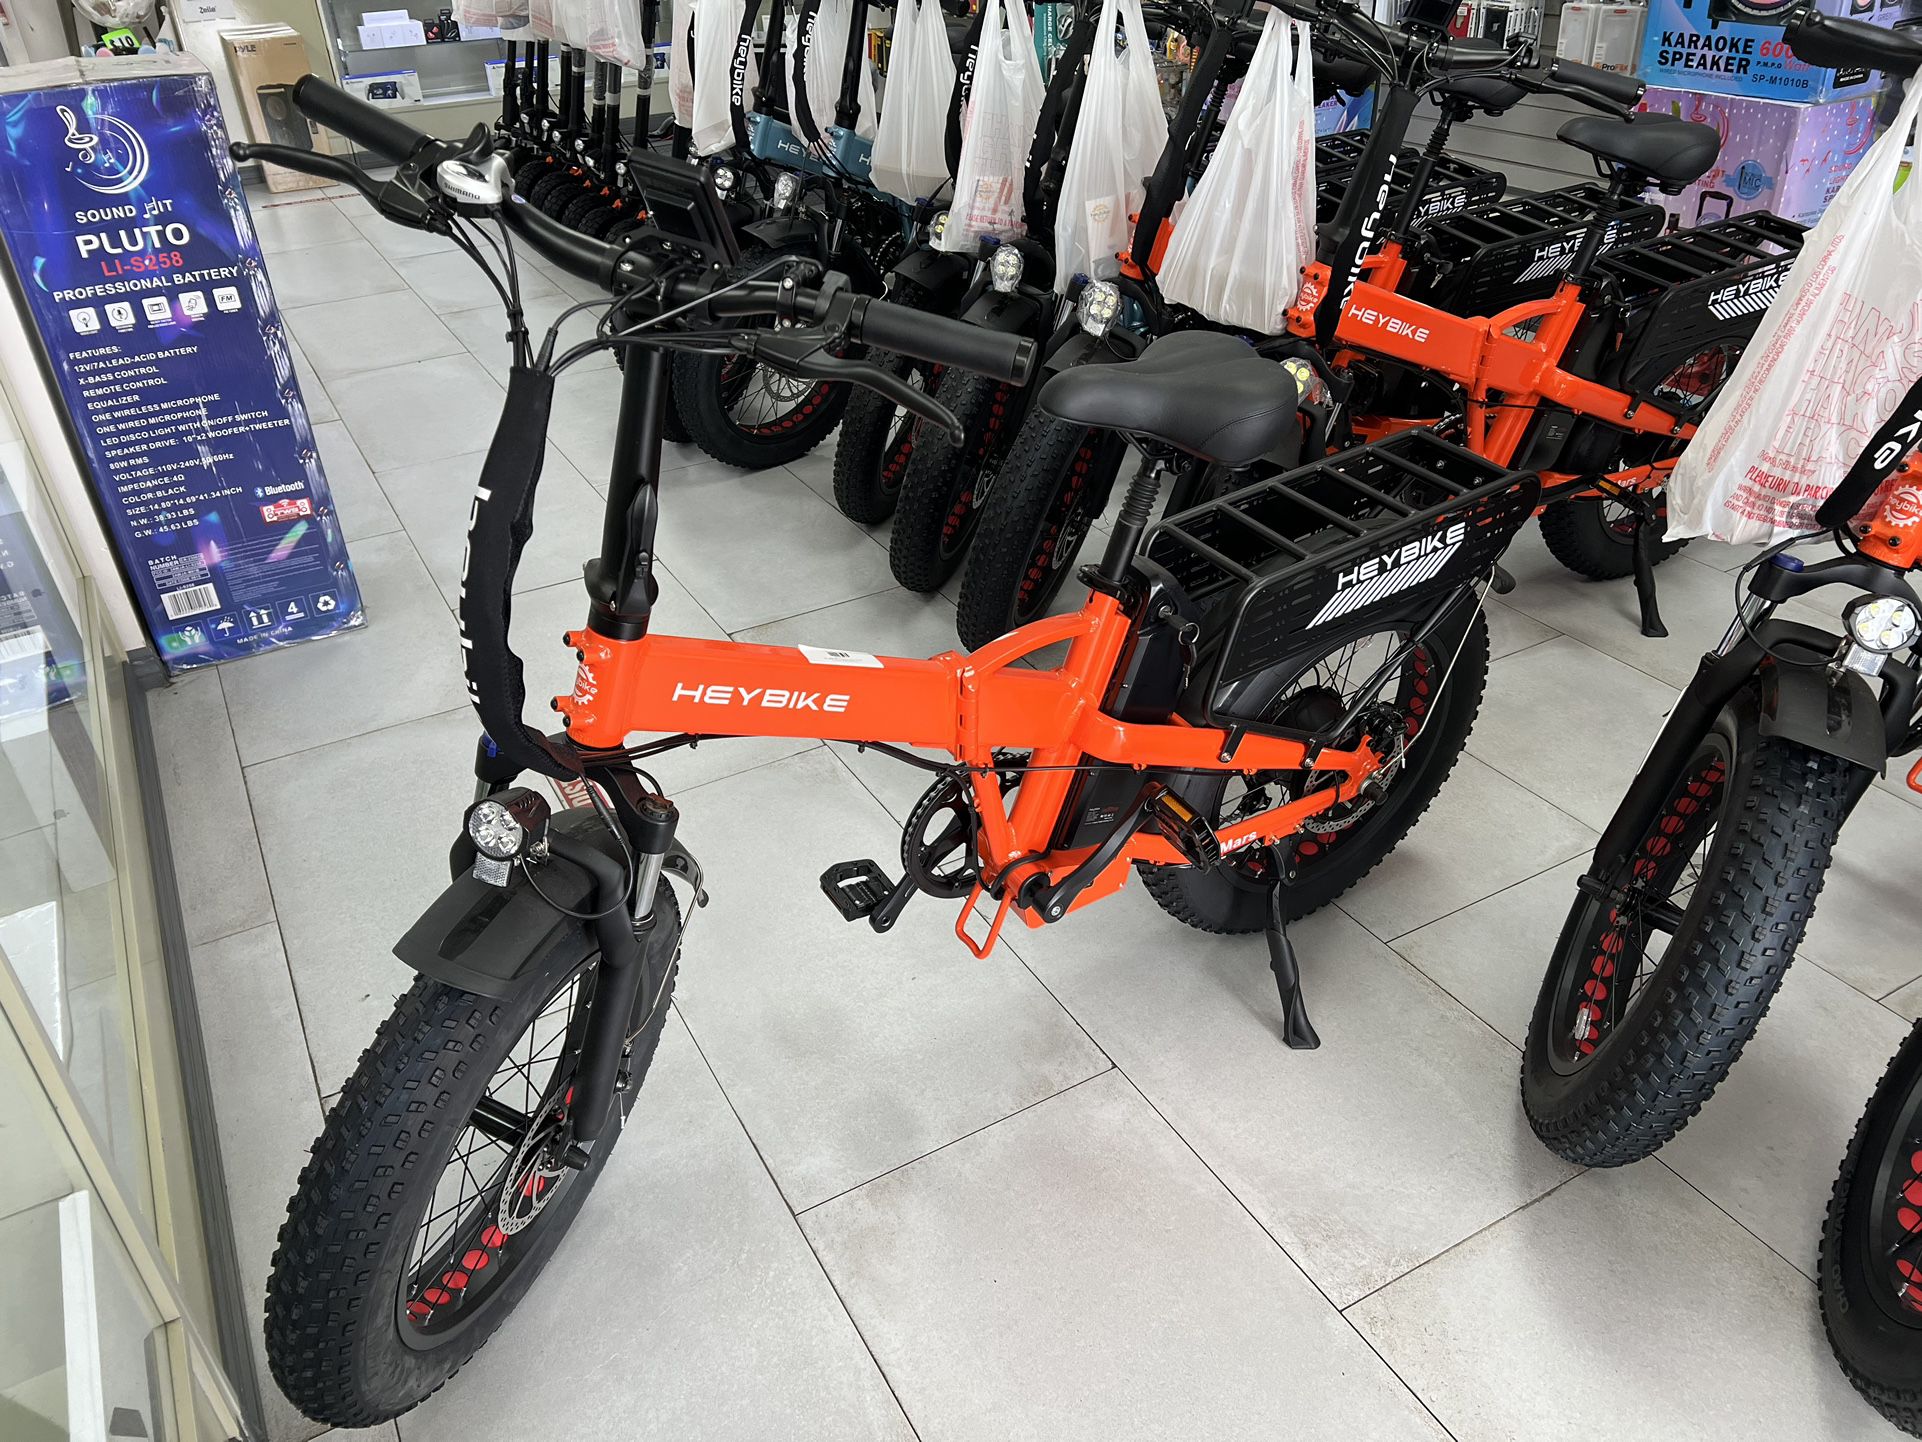 HeyBike Electric Bicycle 750watts 28mph! Finance For $50 Down Payment!!